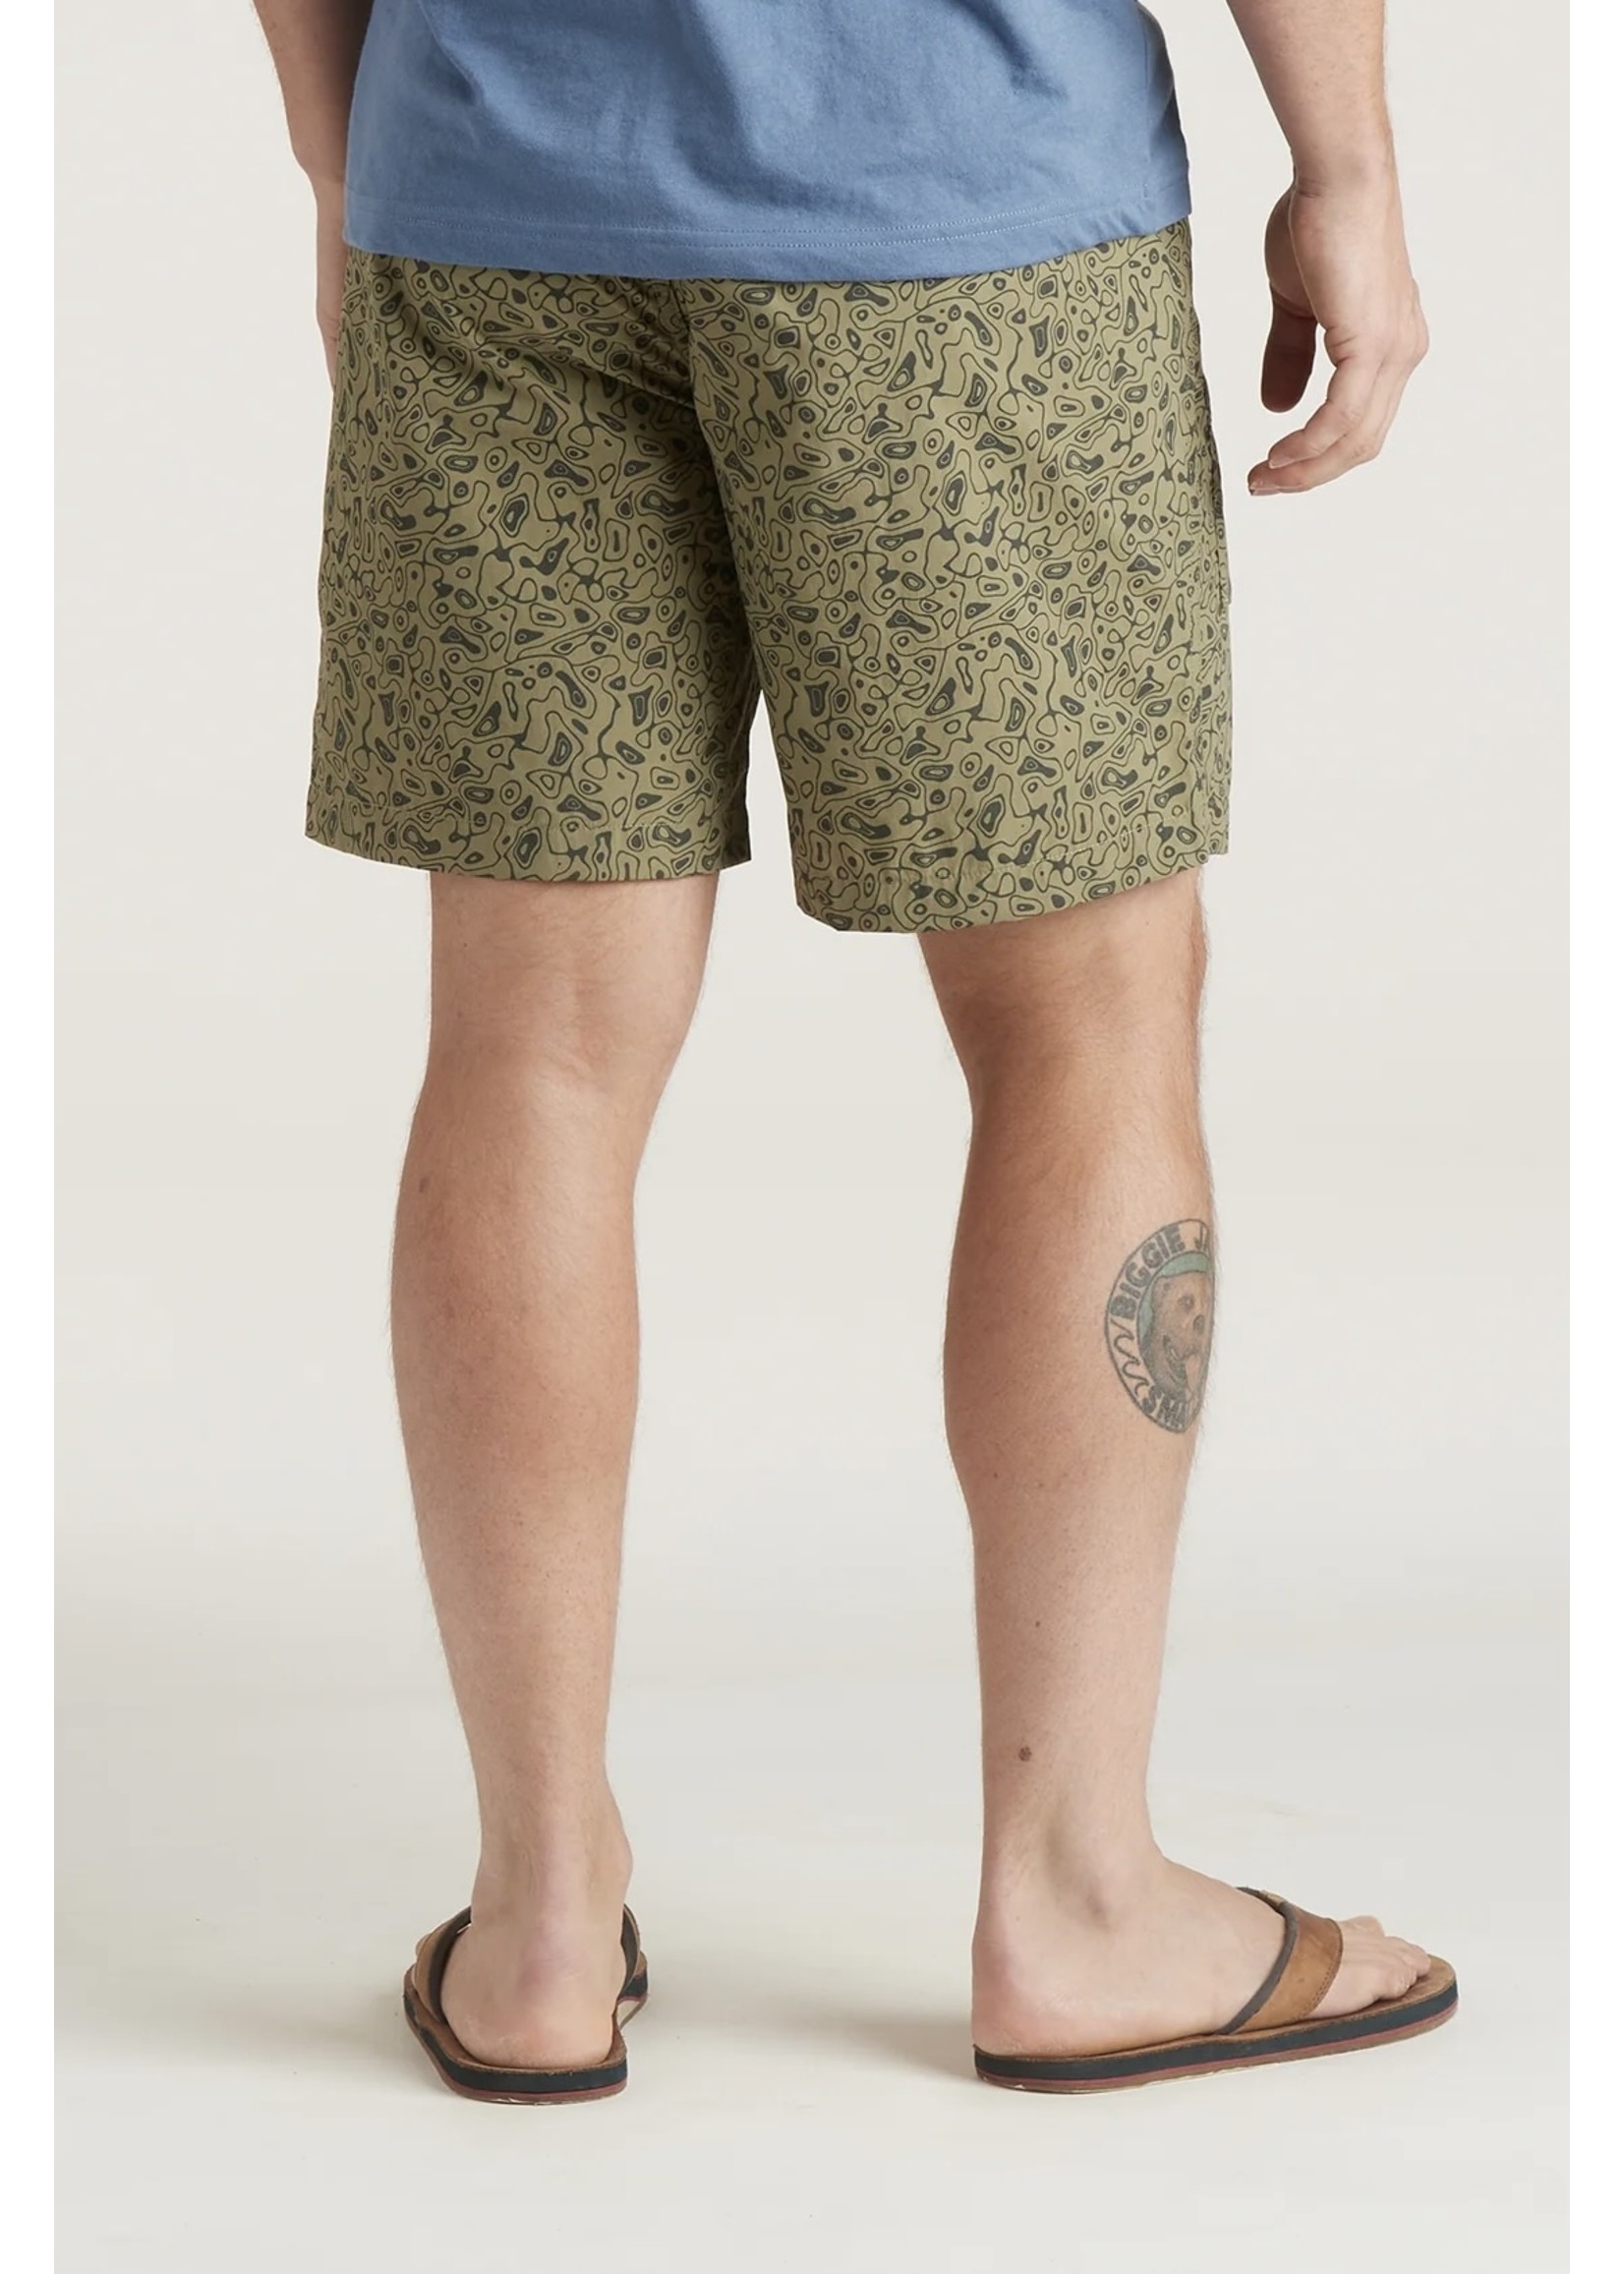 Howler Brothers Pedernales Packable Shorts  Alchemy Aloe